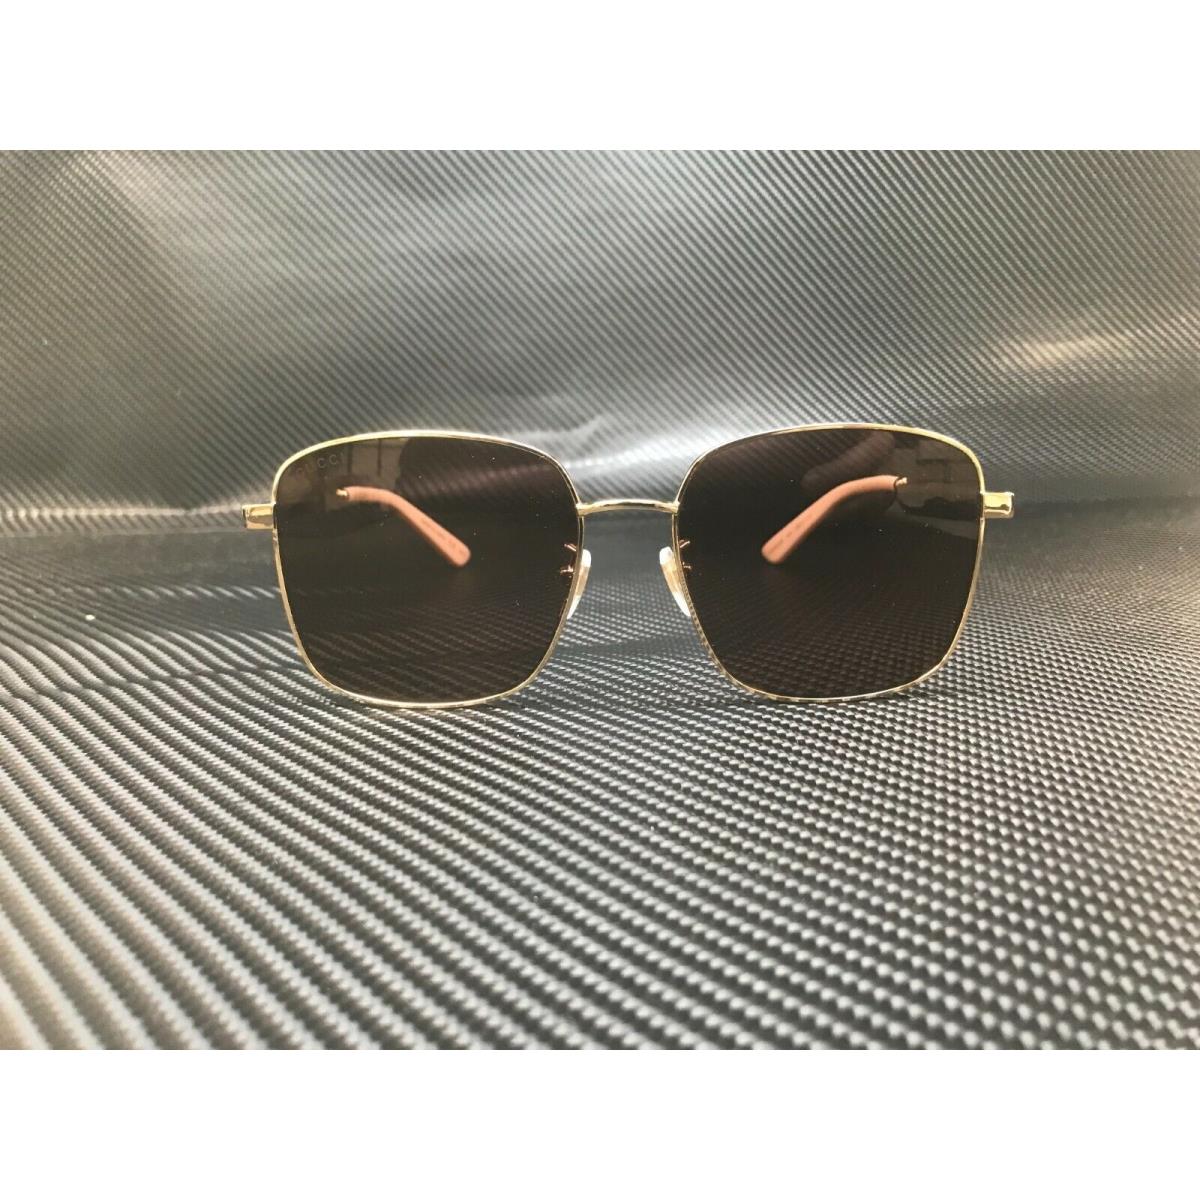 Gucci sunglasses  - Gold Frame, Brown Lens